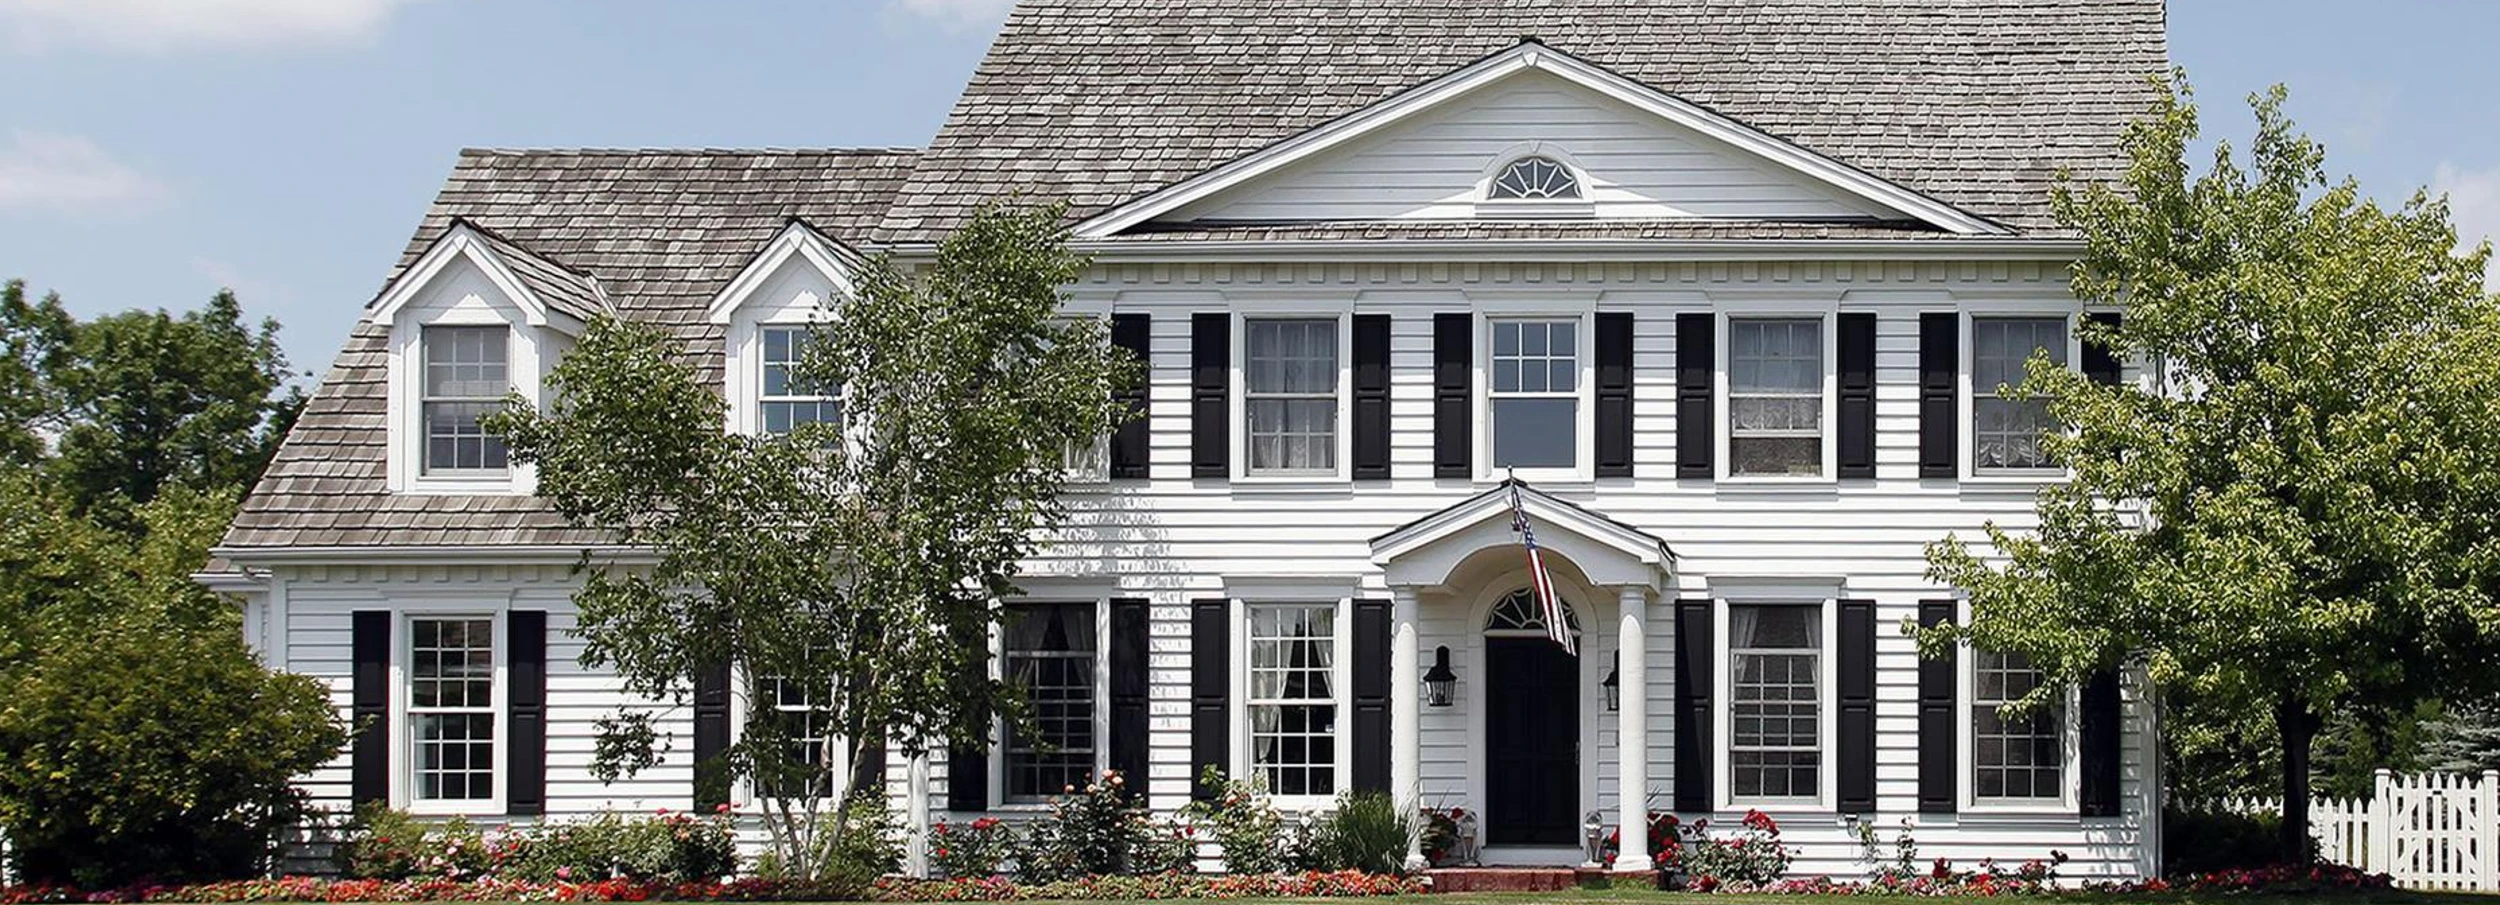 Two story white colonial house with black shutters and landscaped lawn.